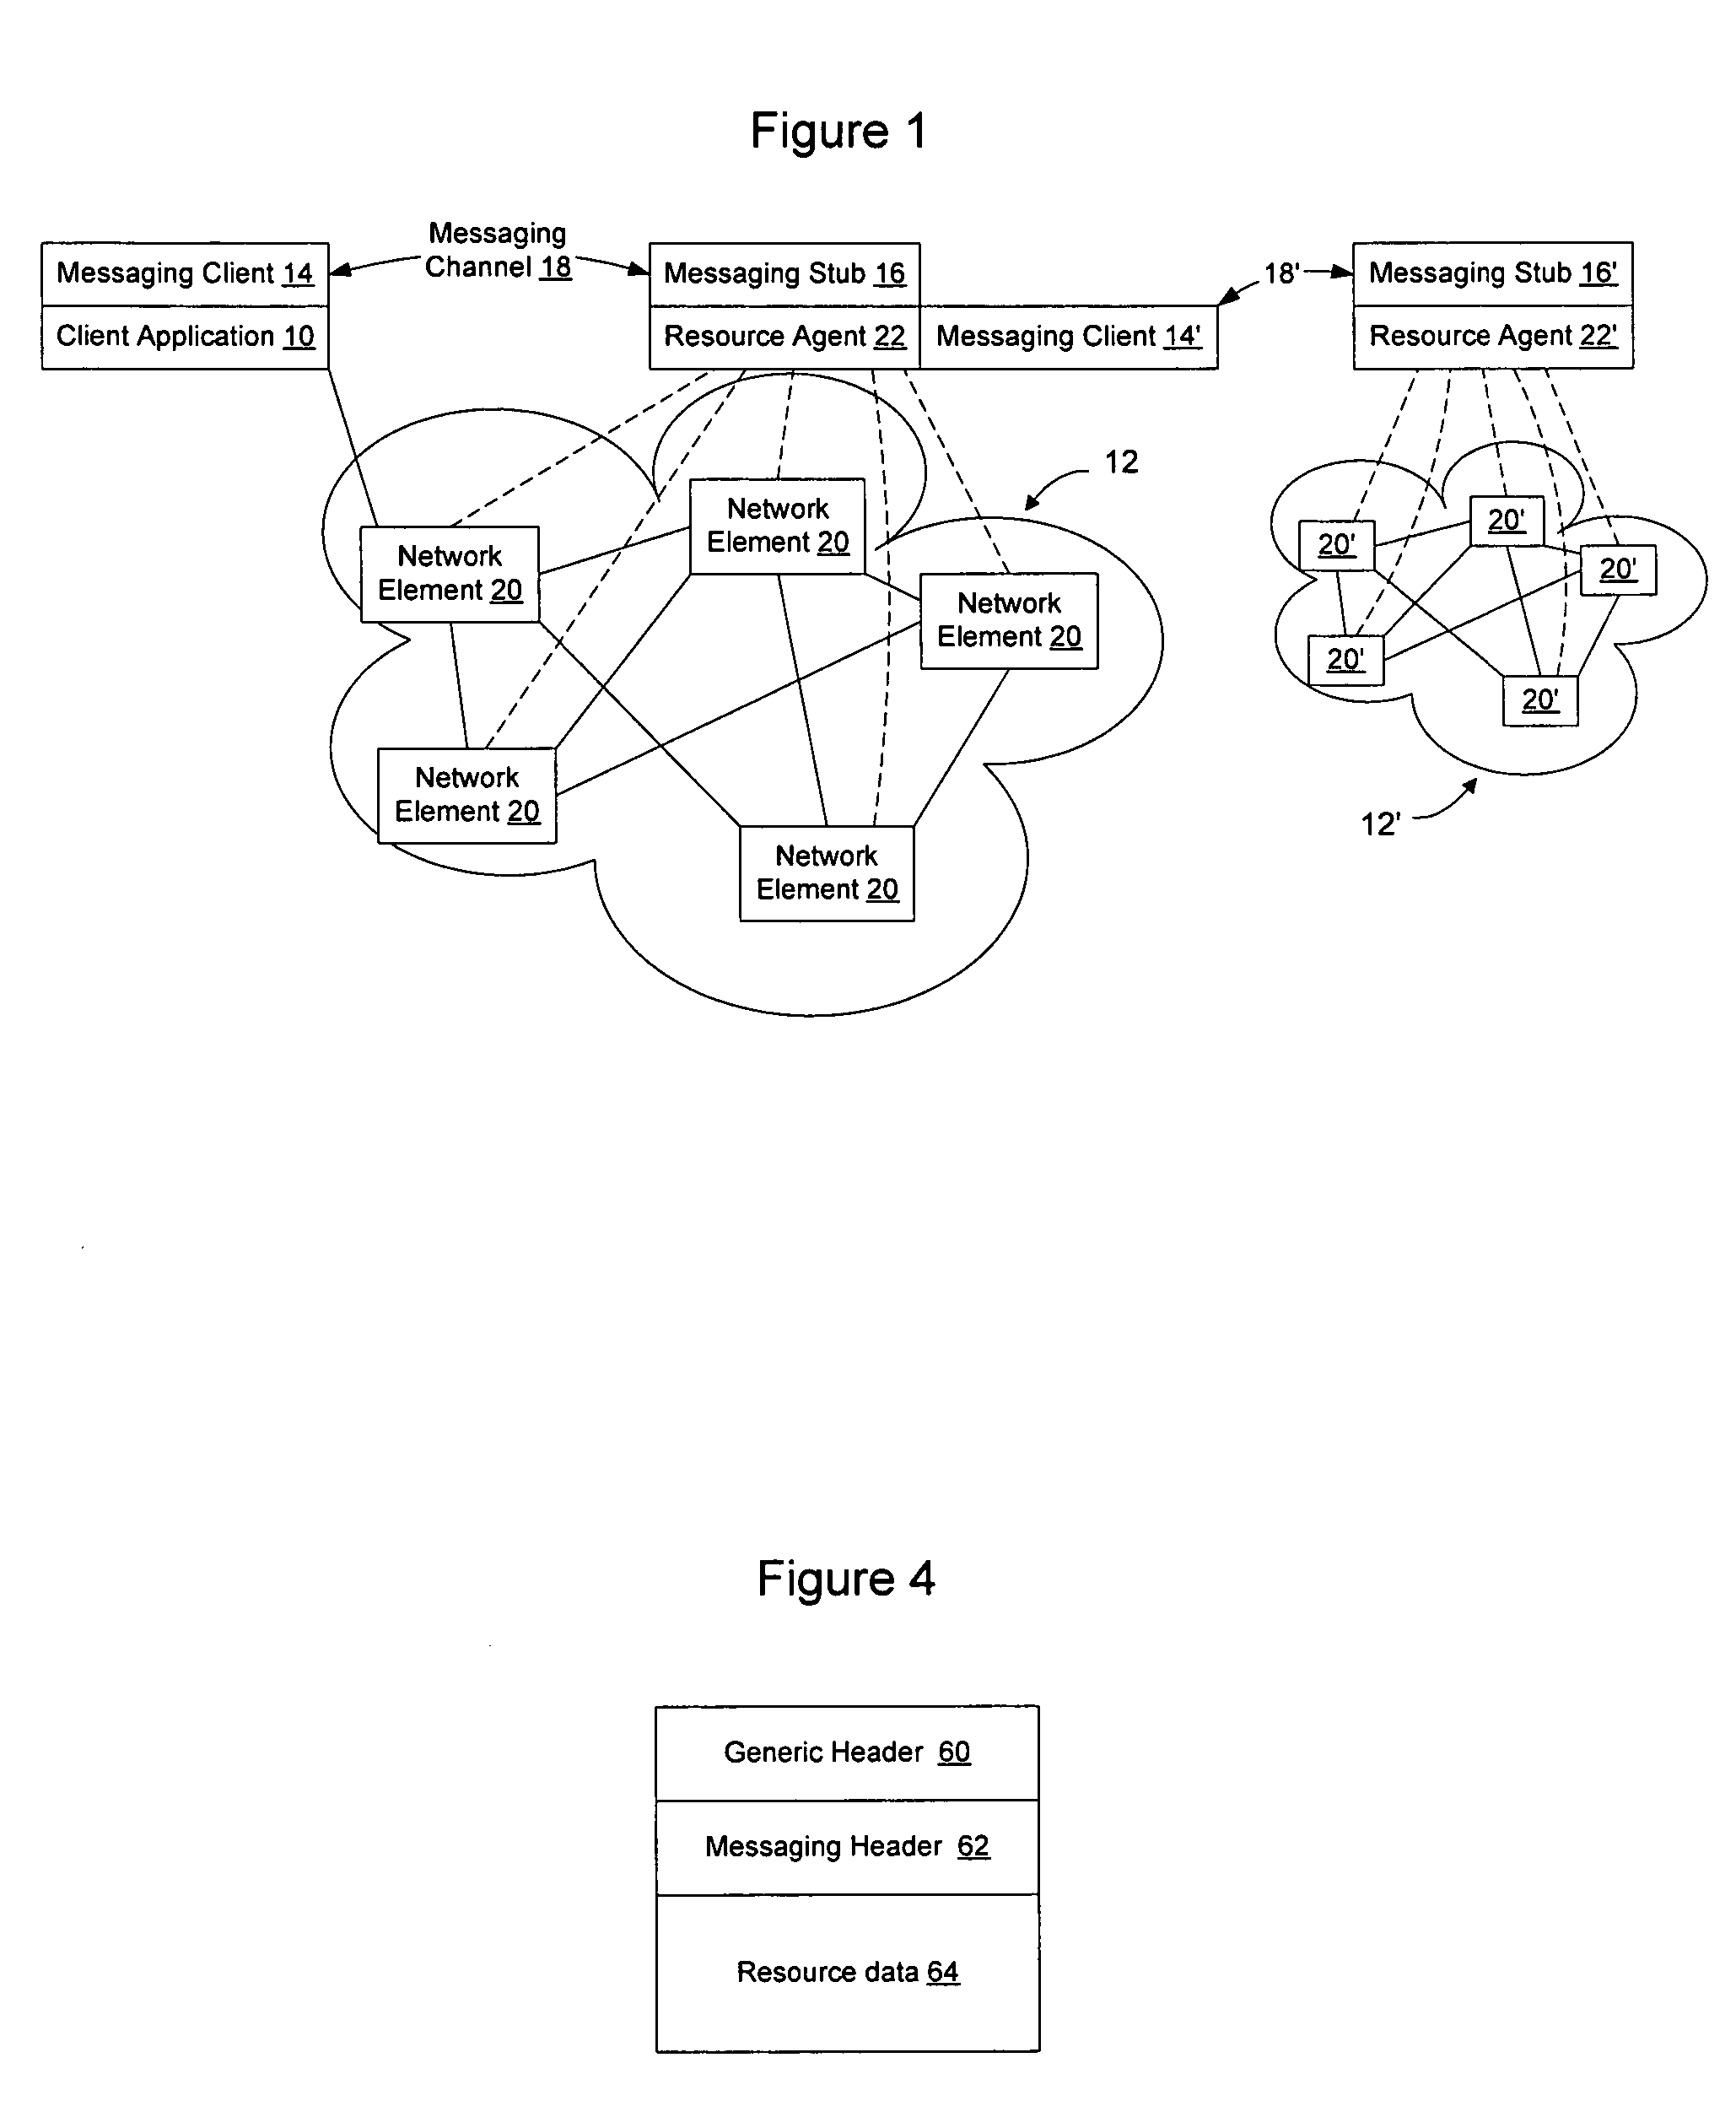 Extensible resource messaging between user applications and network elements in a communication network